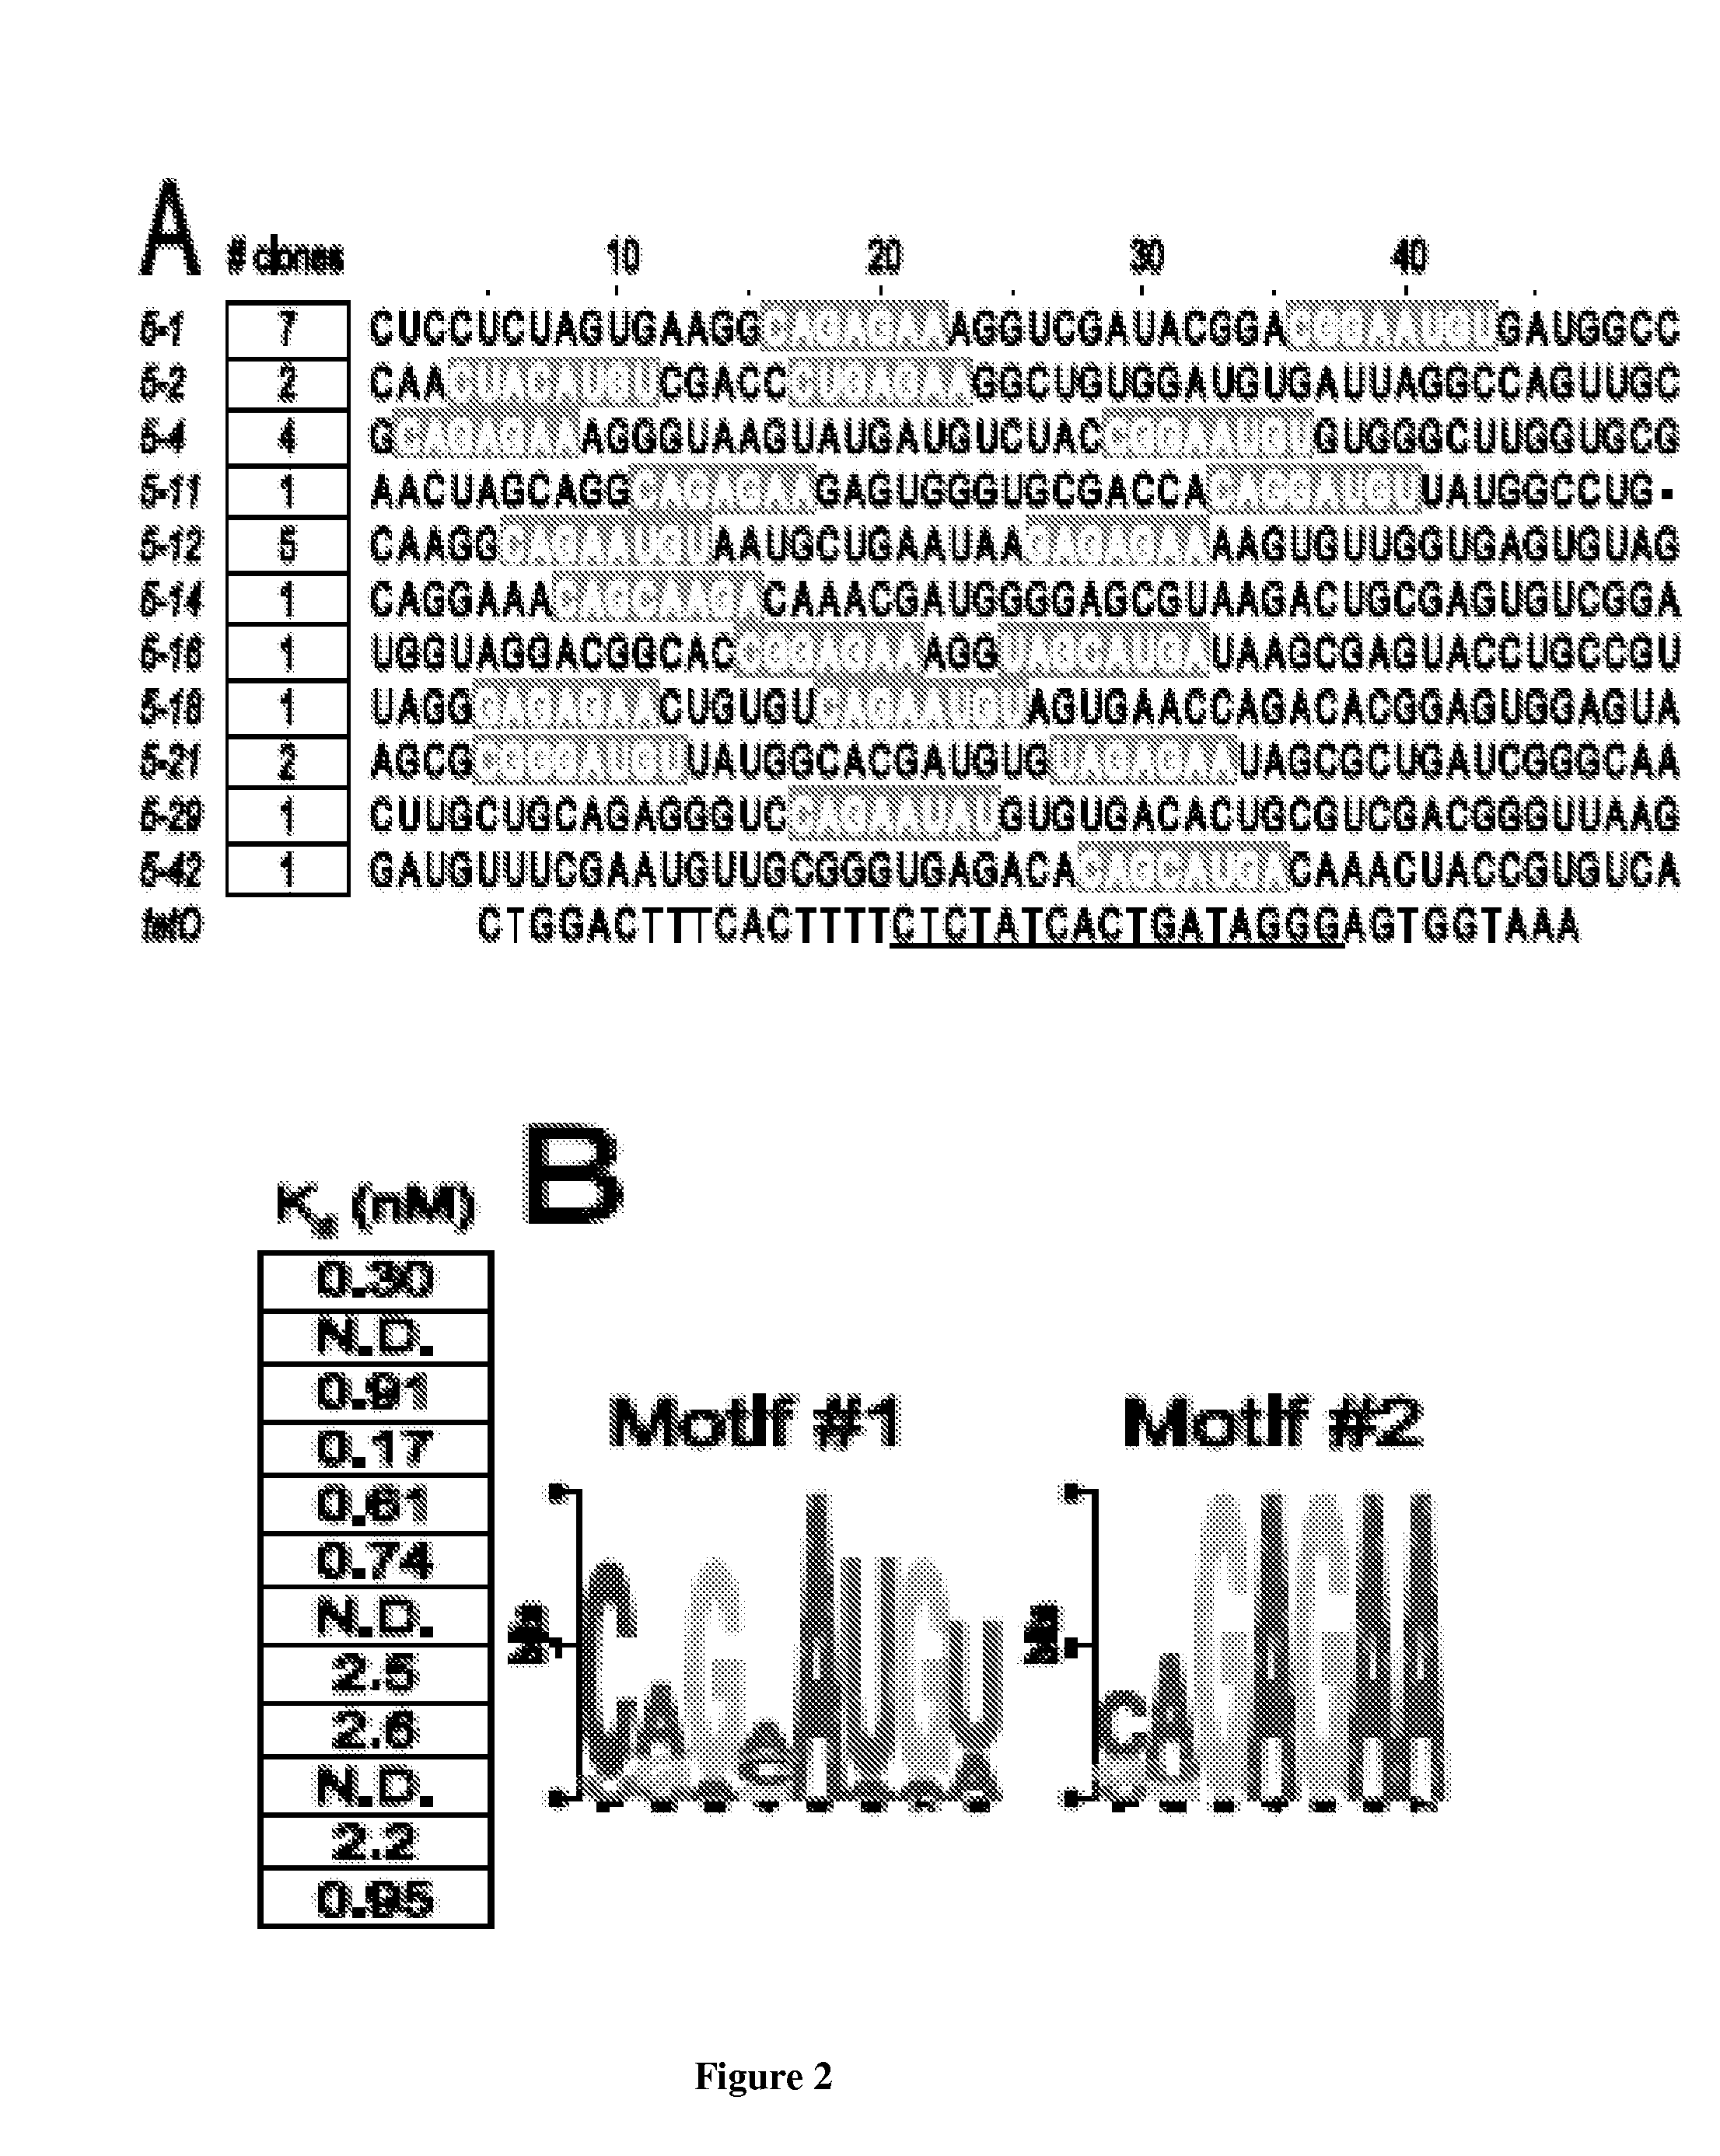 Post-transcriptional regulation of RNA-related processes using encoded protein-binding RNA aptamers